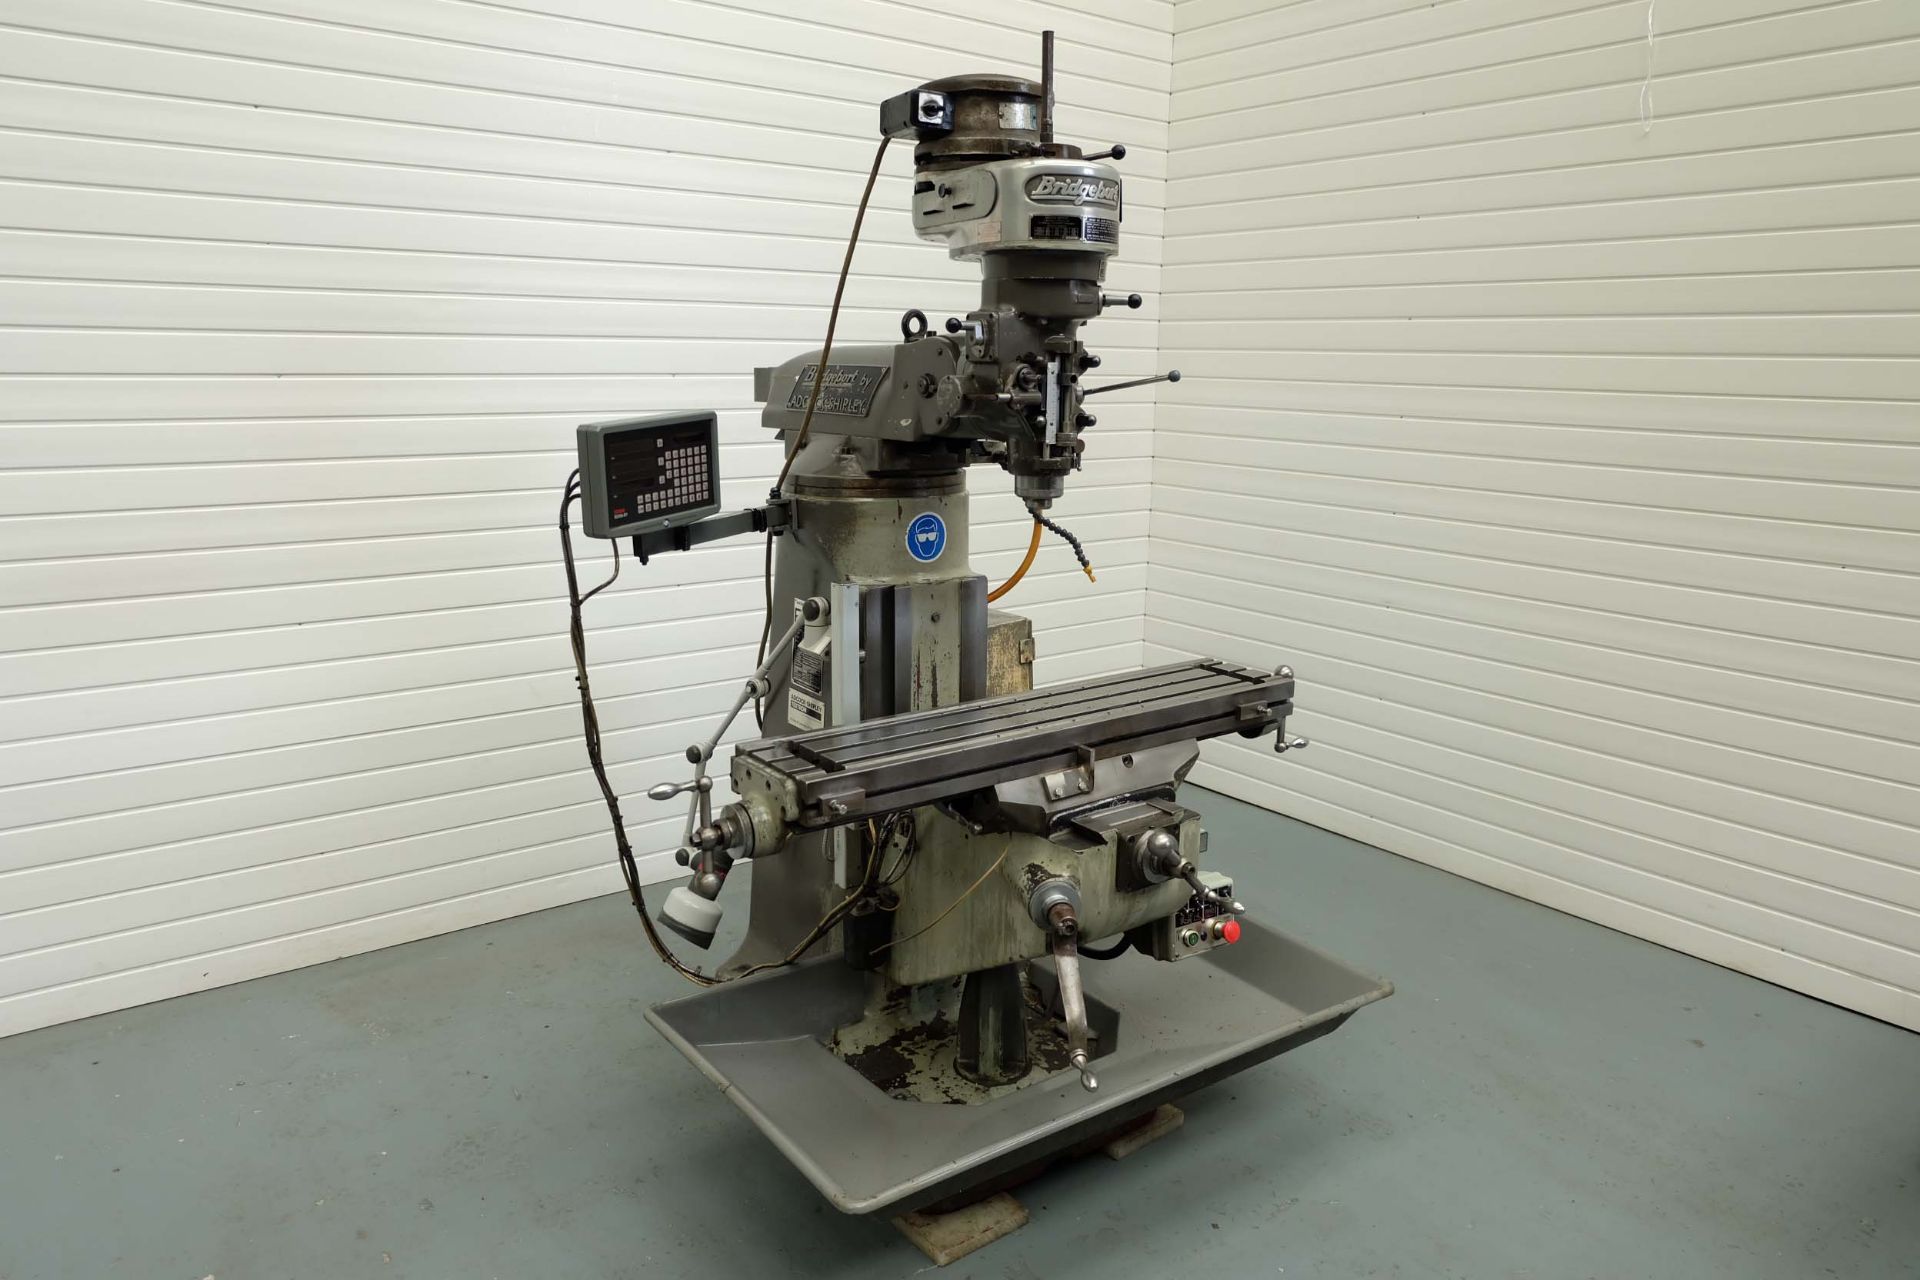 Bridgeport 'J' Type Turret Mill. Table Size: 42" x 9". Spindle Taper R8. Spindle Speeds. Power Feed